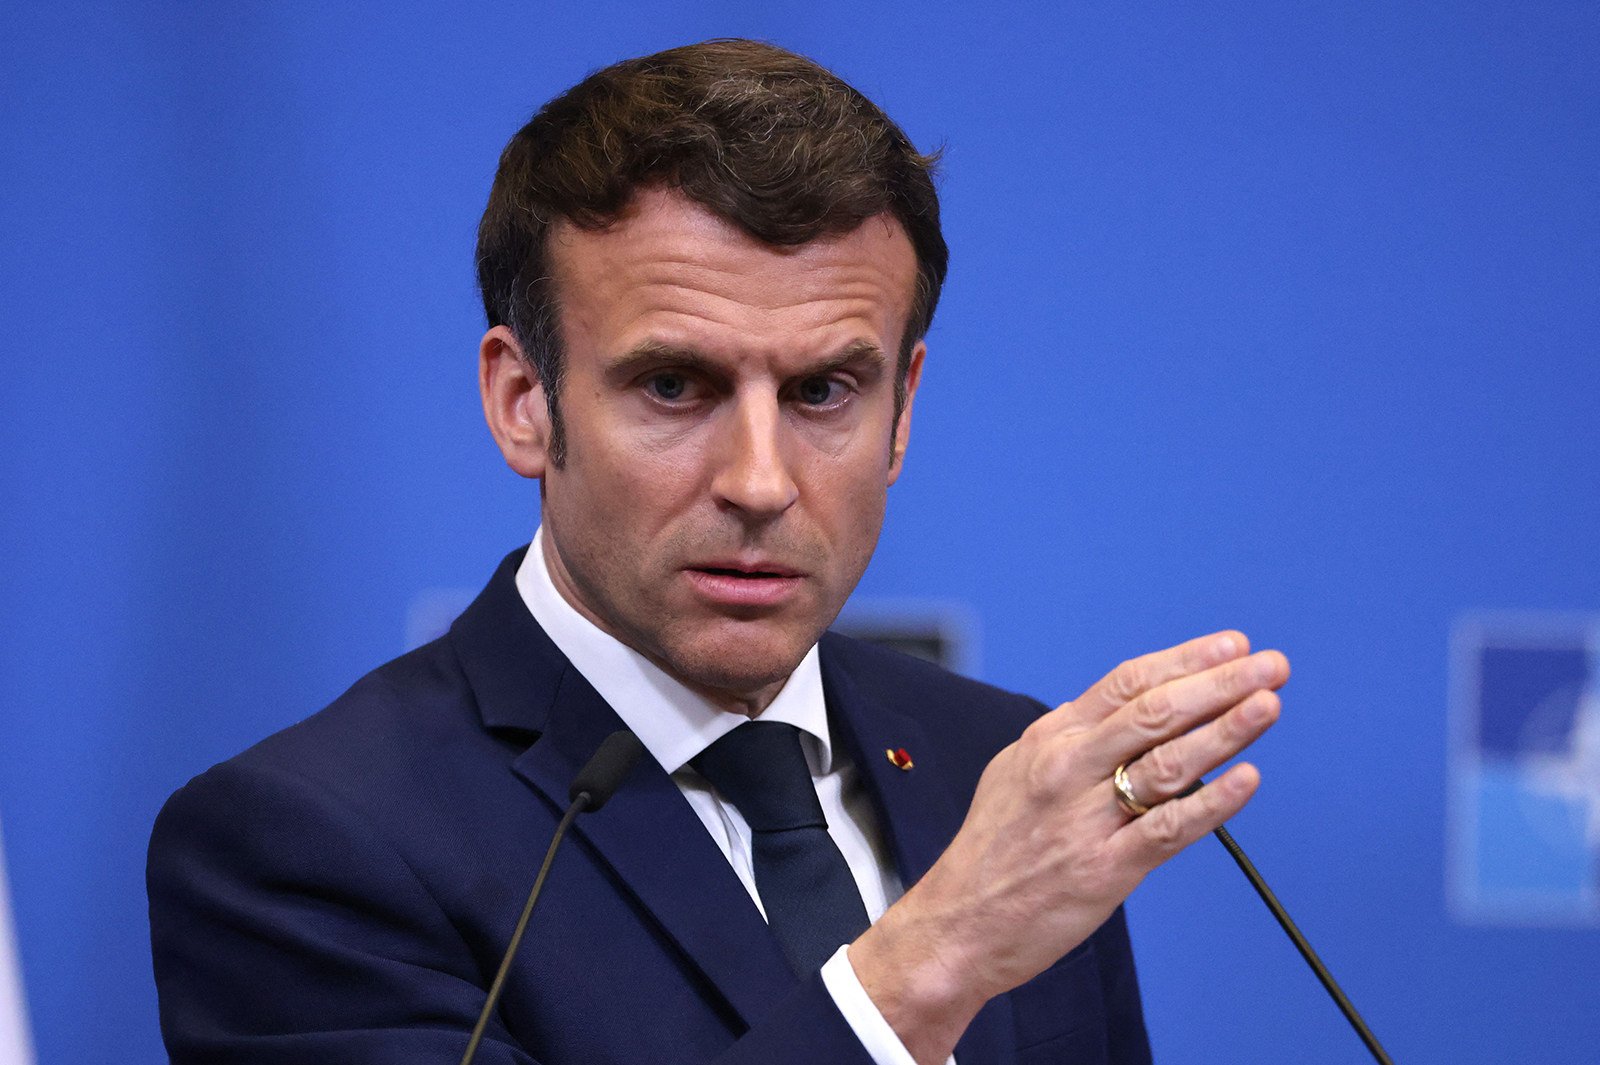 France’s Emmanuel Macron triggered shockwaves through Europe when he said the West should not rule out sending troops to Ukraine to battle Russia. Photo: TNS